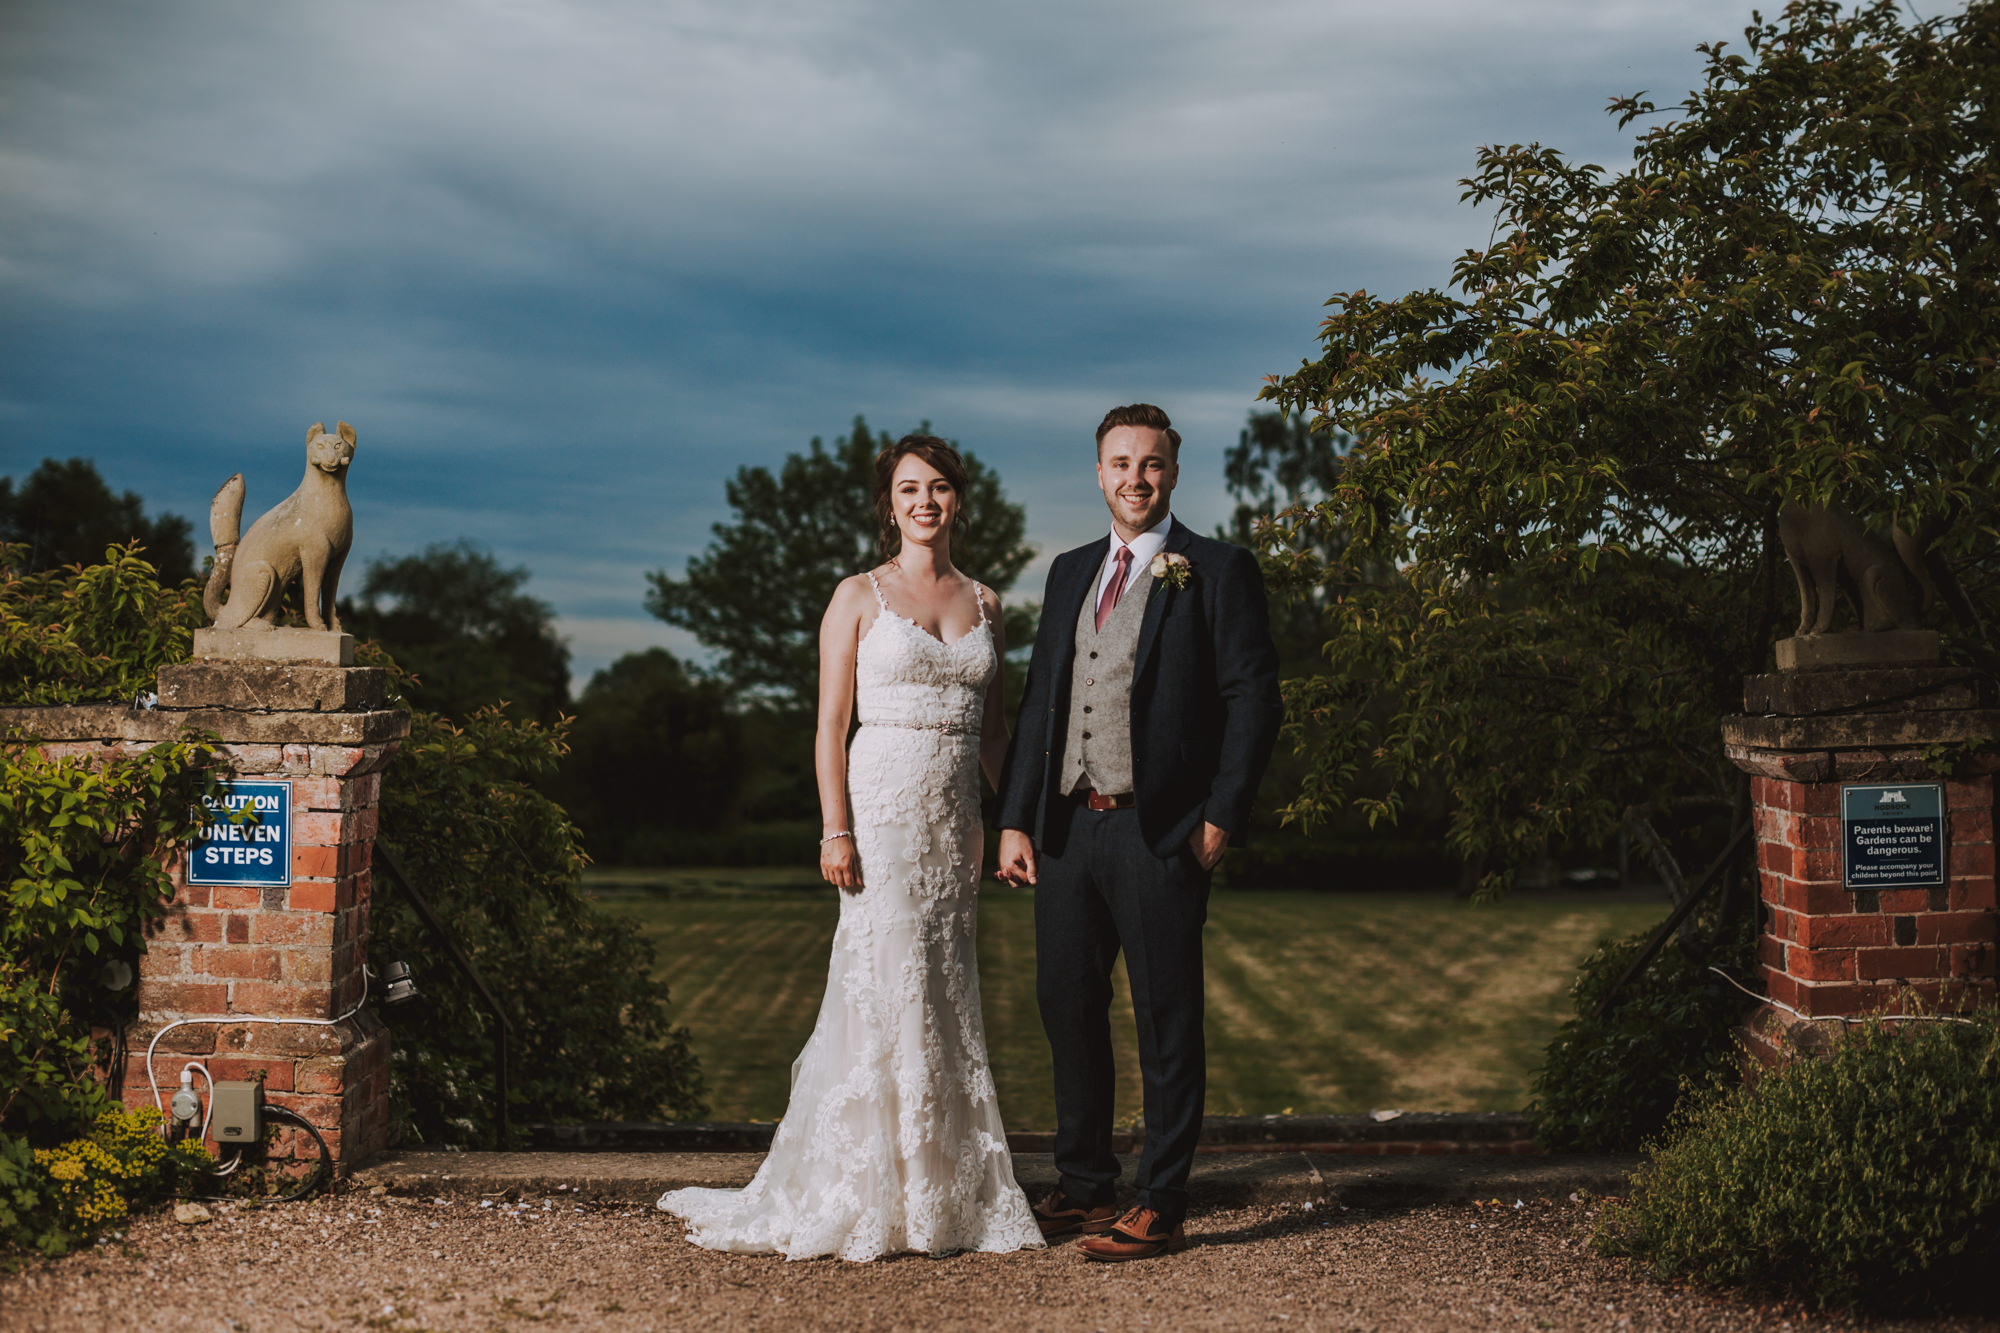 The best wedding photographers south yorkshire